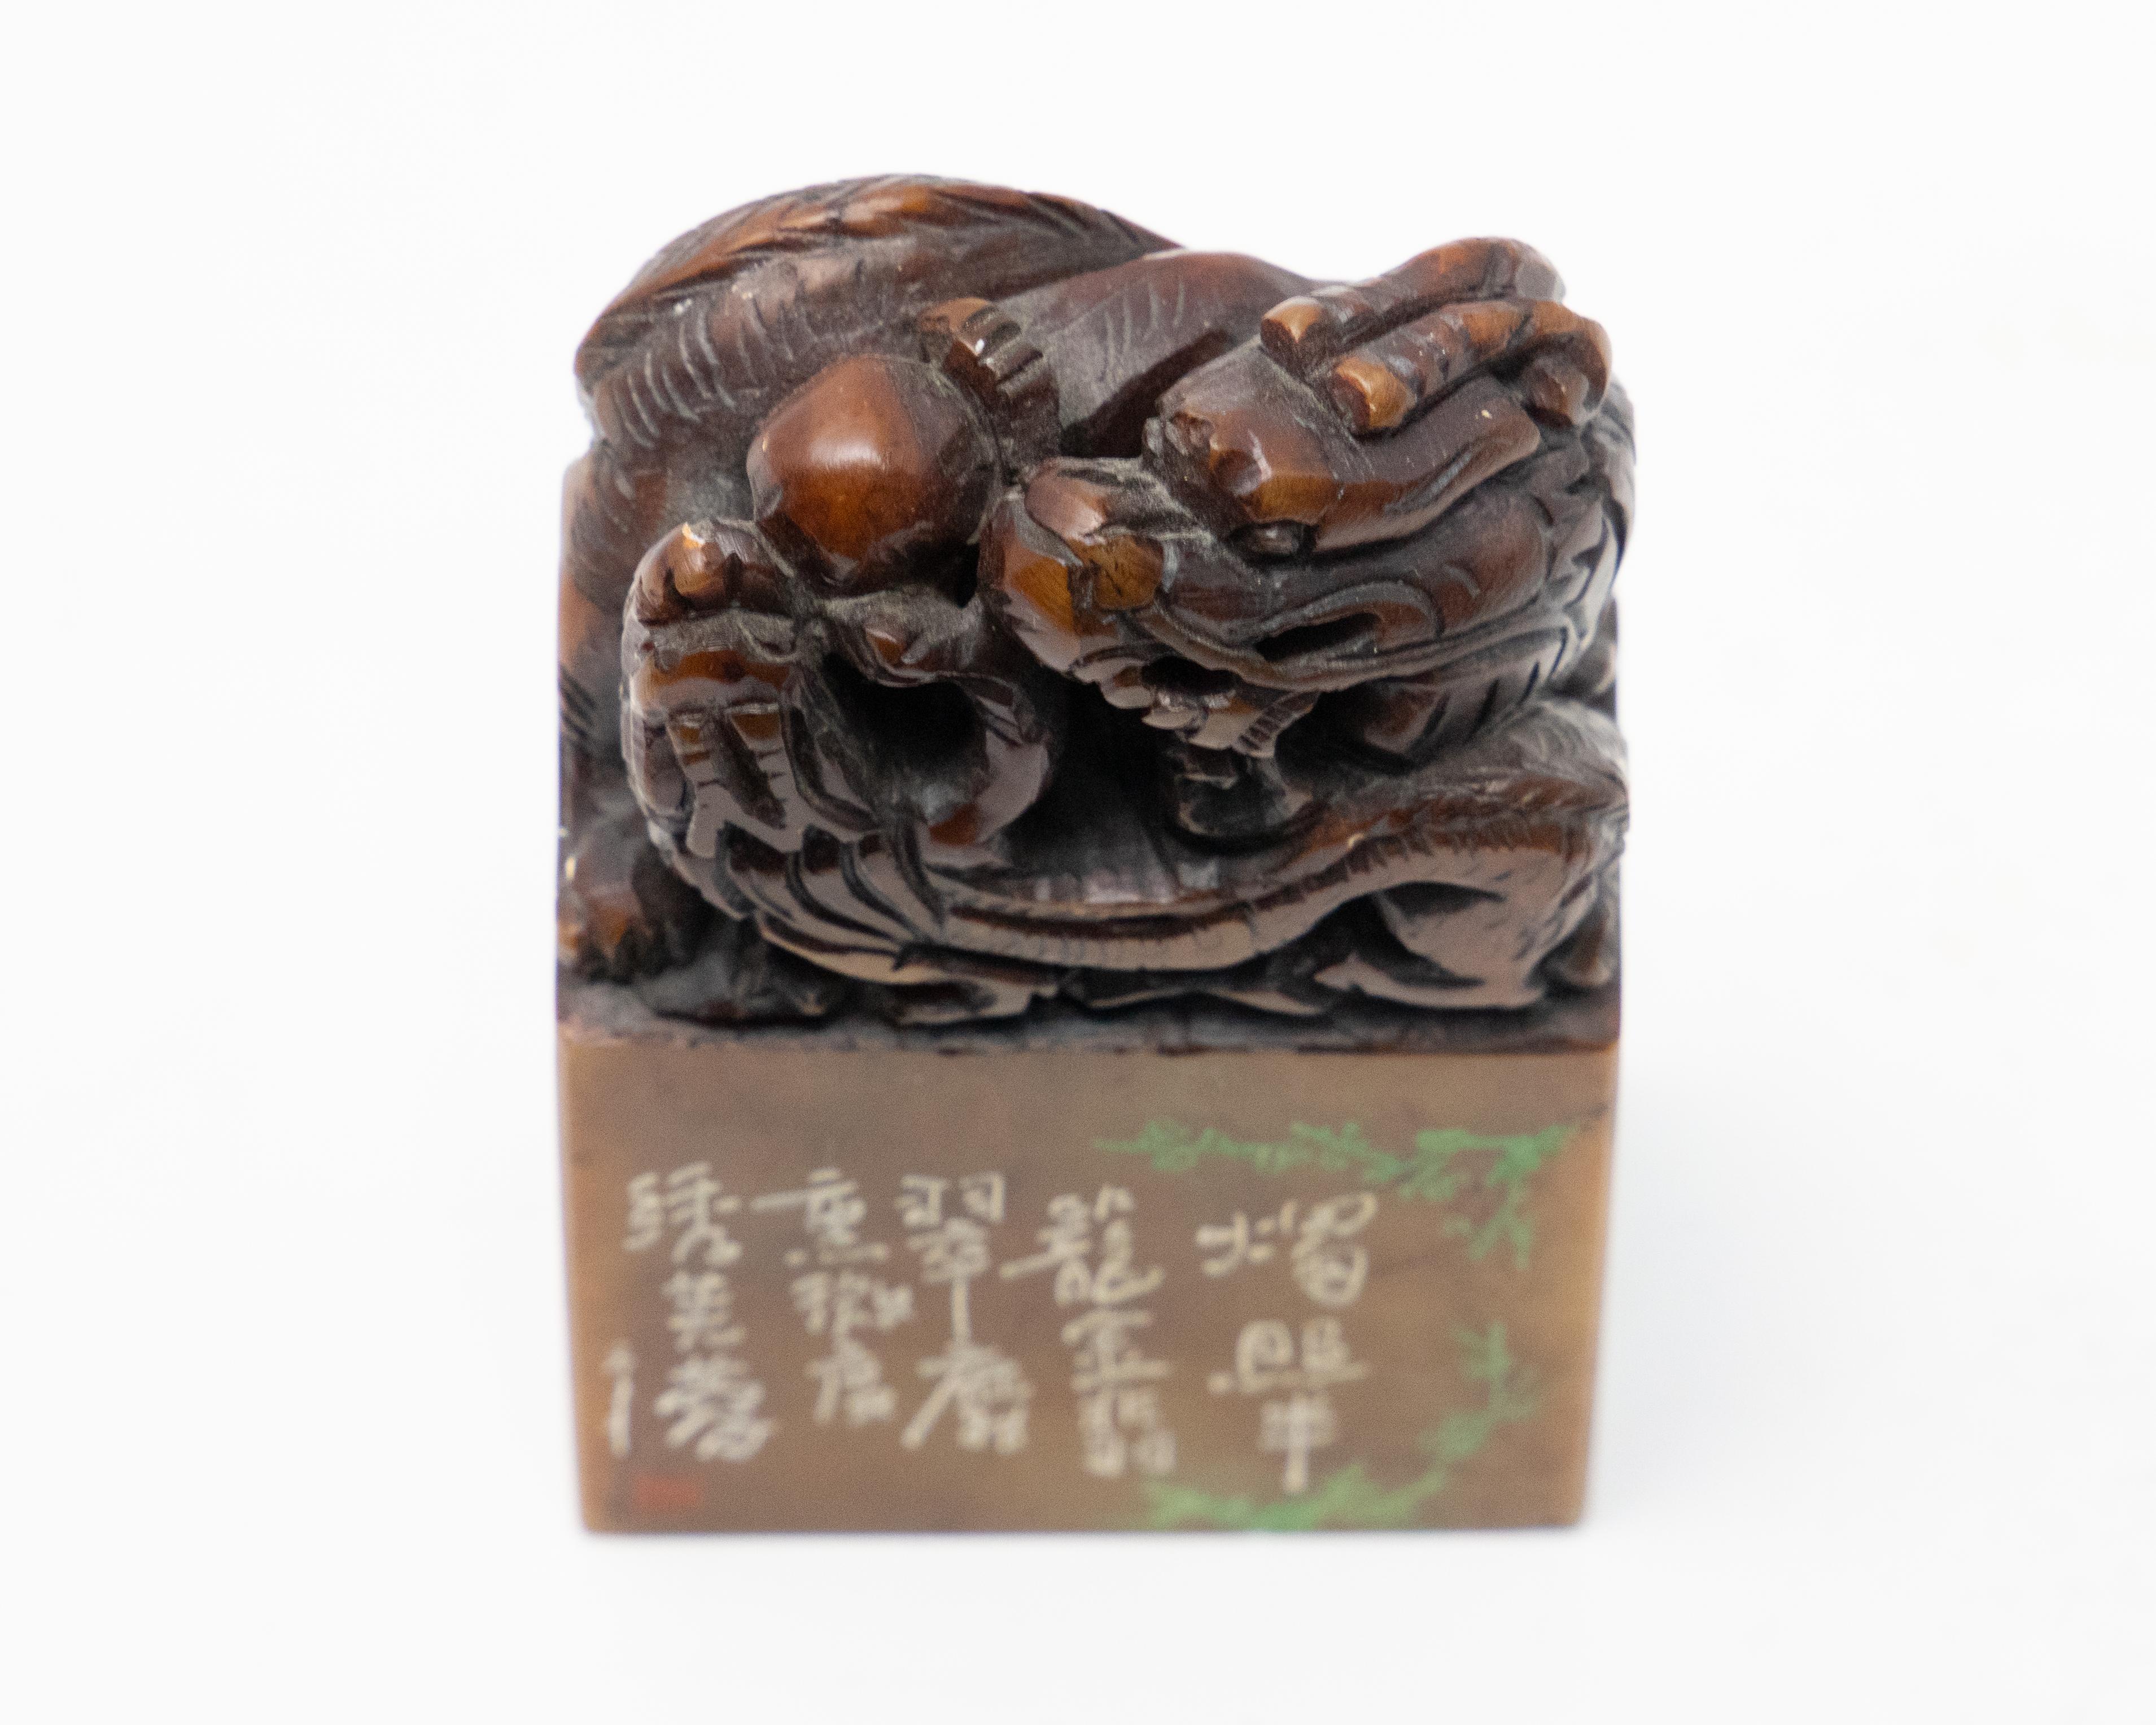 Offering this Chinese soapstone chop seal. On top it depicts two dragons and the pearl. It has markings on the front side base. The base is rectangular and short. 

History of the Chinese chop seal. Chop seals have been a part of Chinese culture